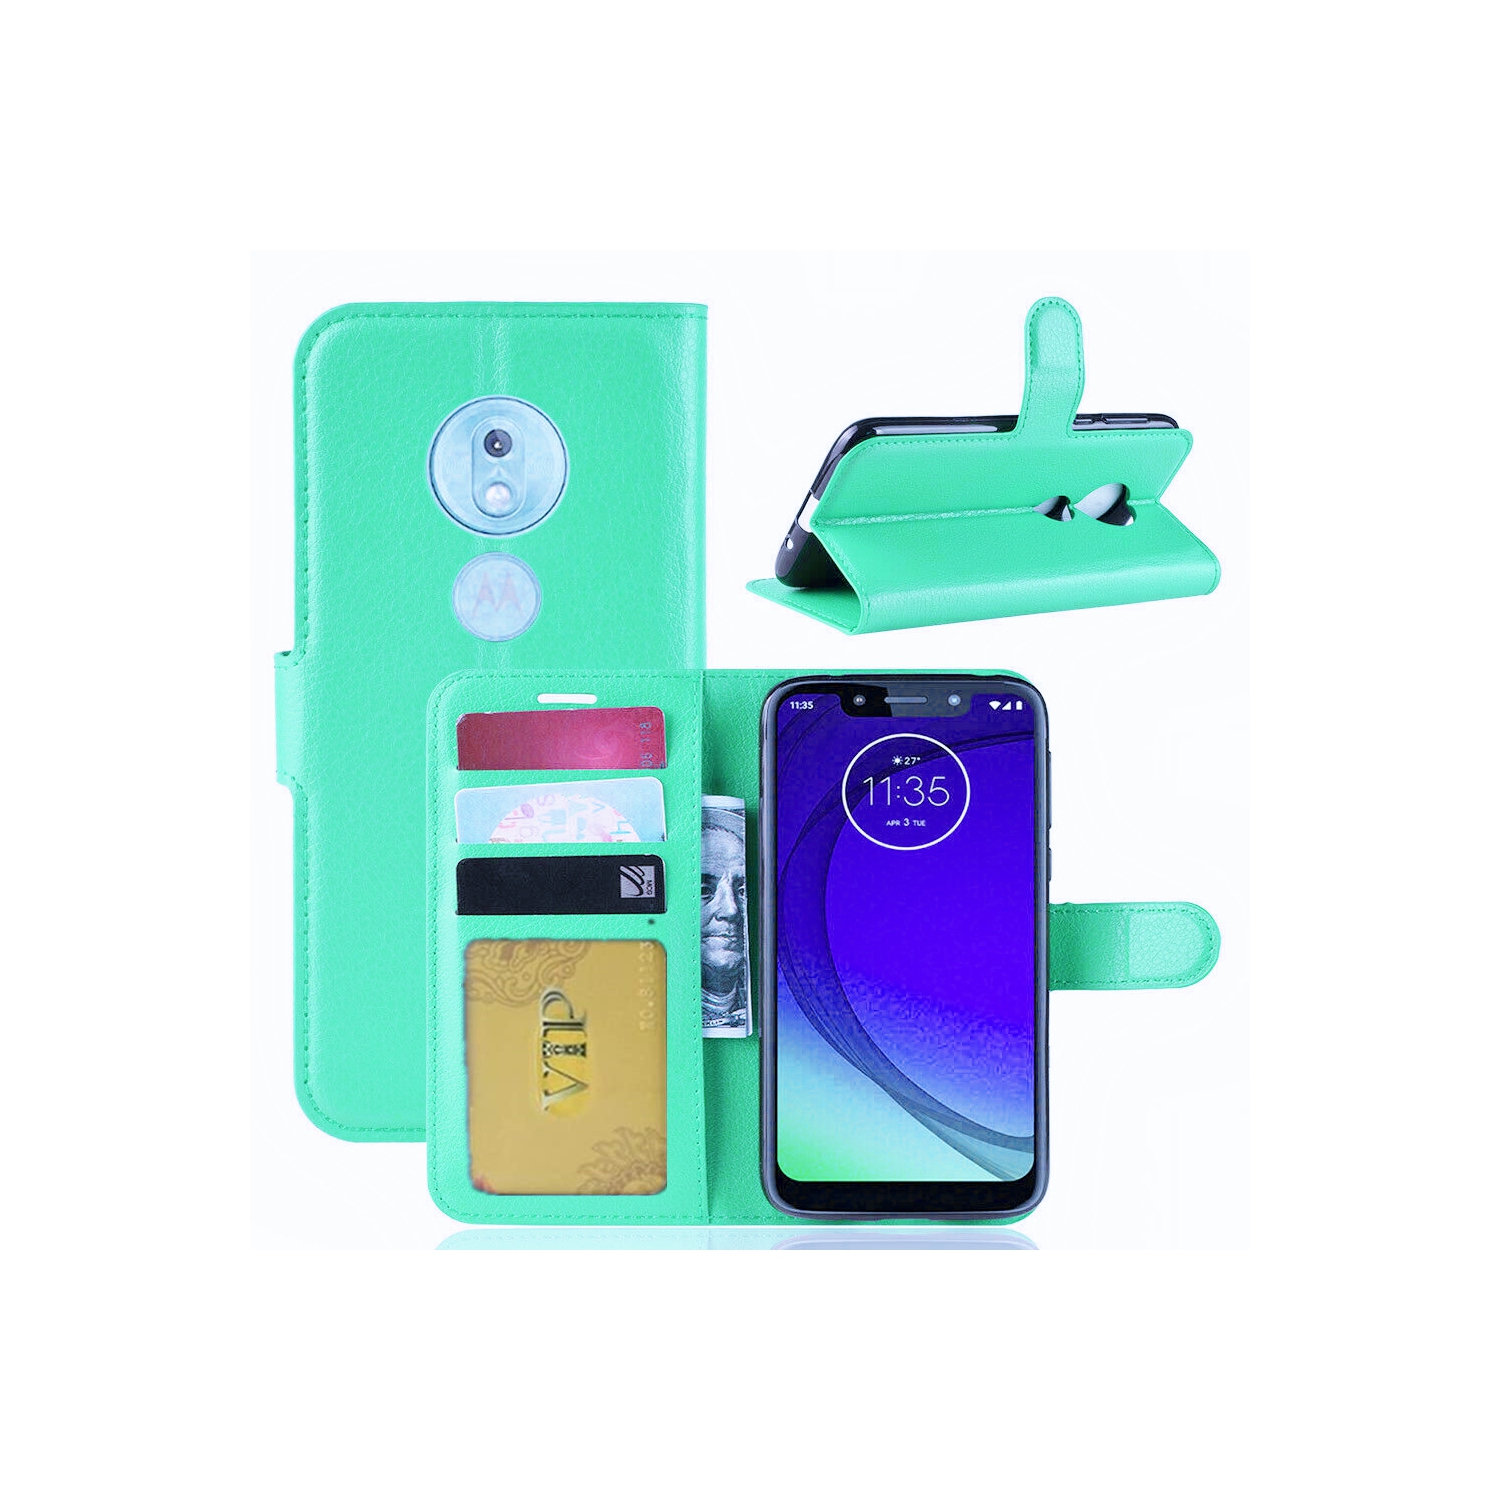 [CS] Motorola Moto G7 Case, Magnetic Leather Folio Wallet Flip Case Cover with Card Slot, Teal